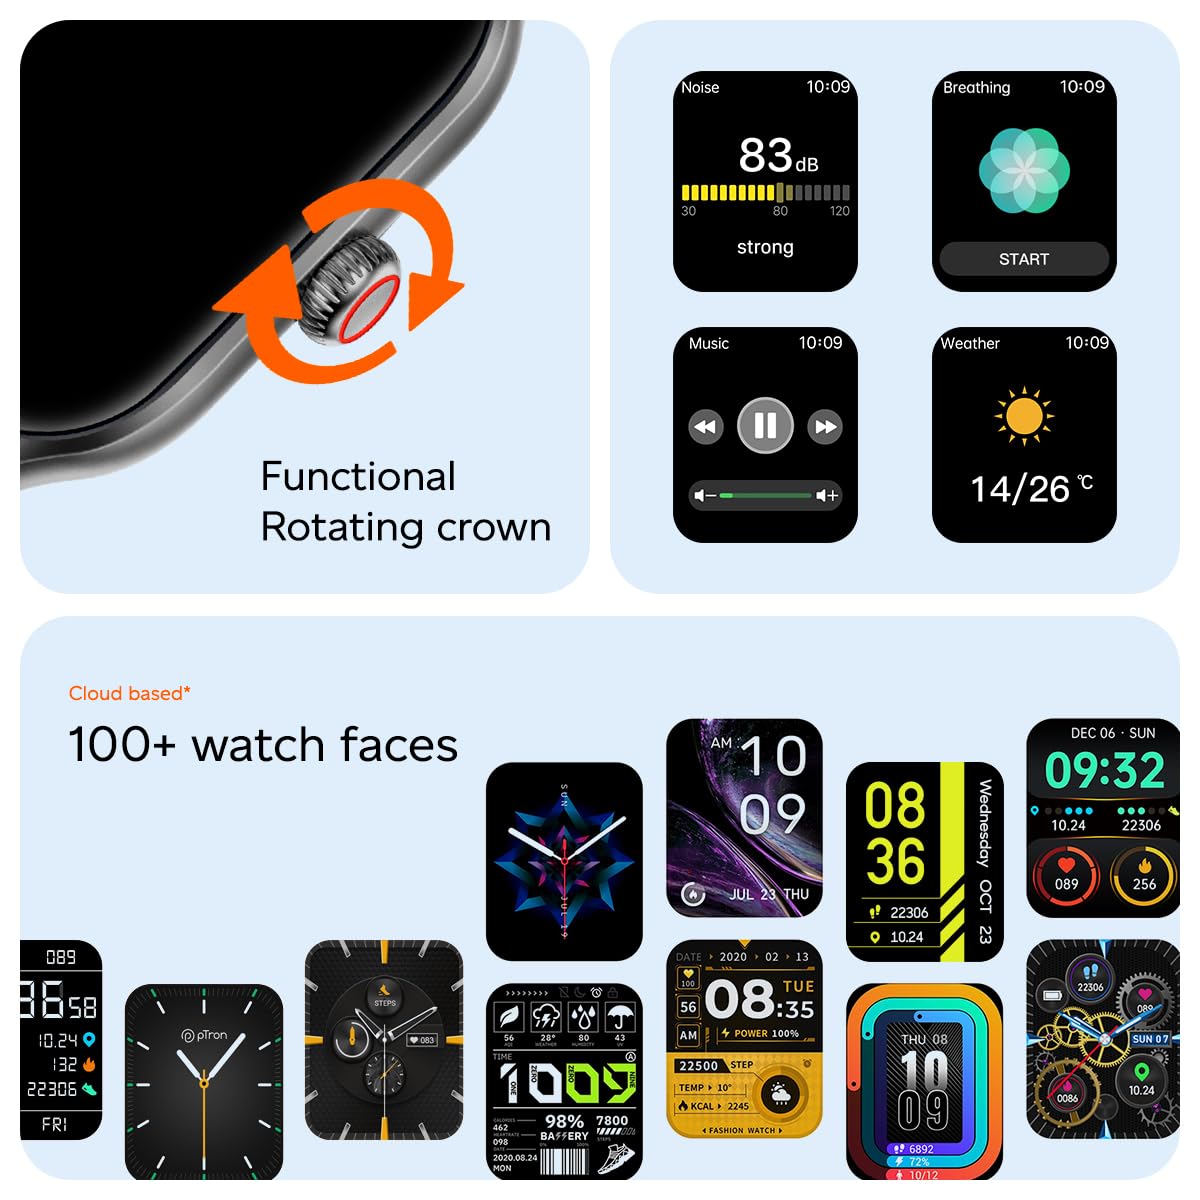 pTron Newly Launched Reflect MaxPro 2.01 inch Square Dial Smartwatch, Full Touch Display, Bluetooth Calling, Functional Crown, 600 NITS, 100+ Watch Faces, HR, SpO2, 5 Days Battery Life & IP68 (Black)